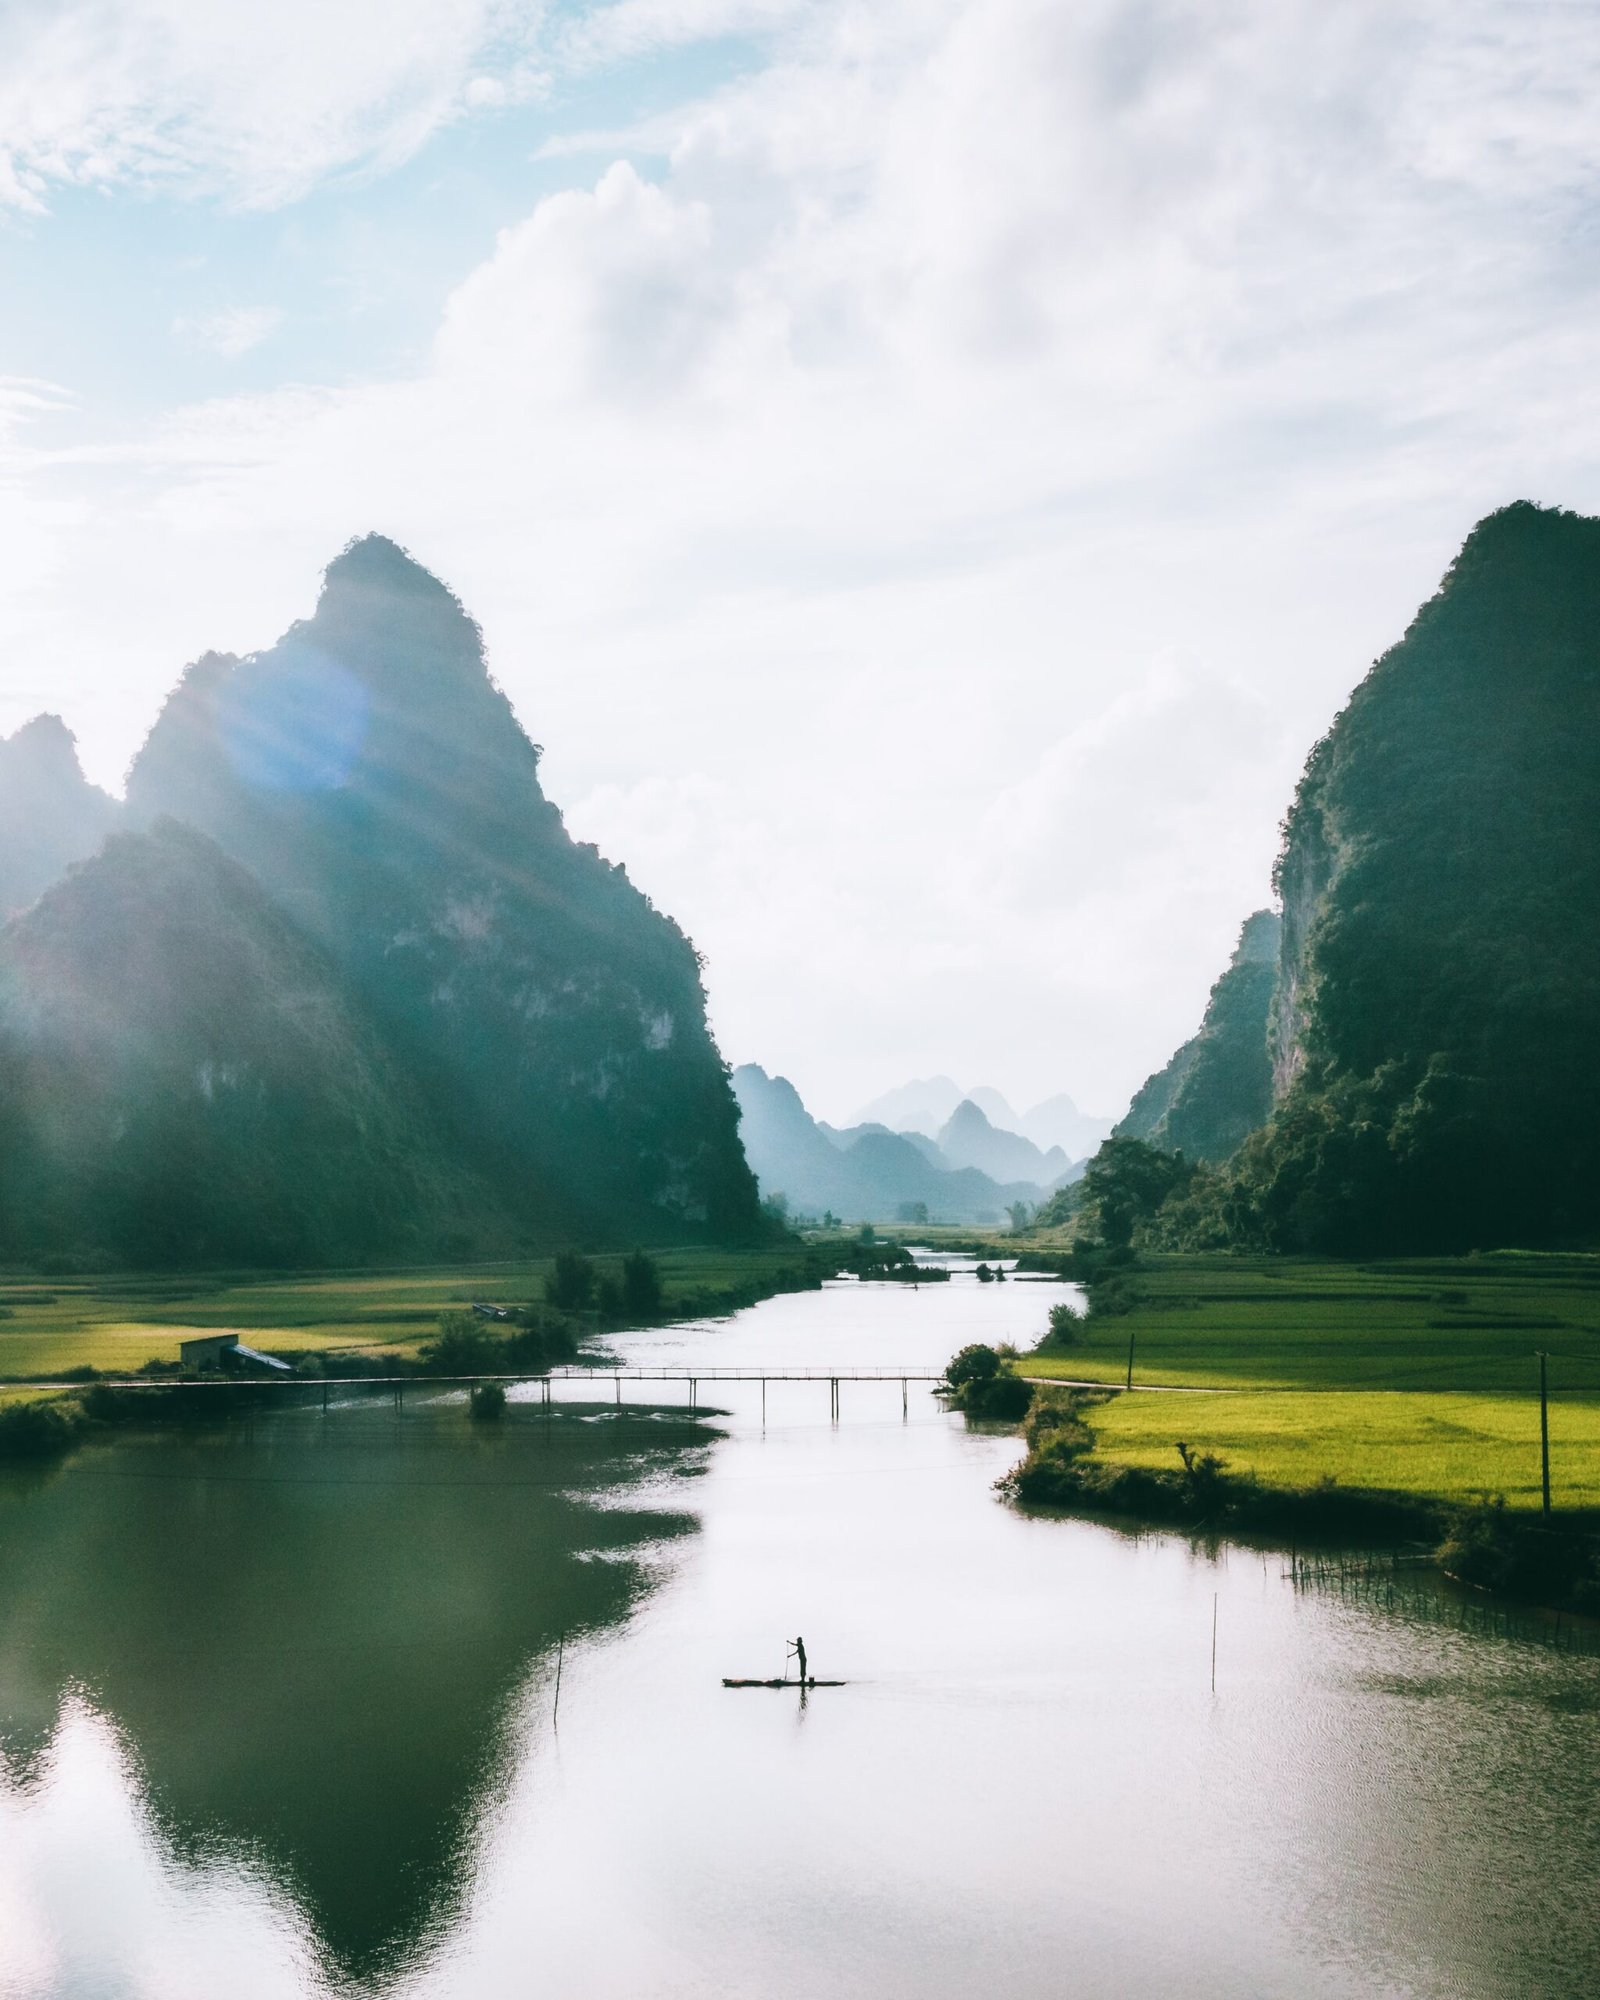 Drone shot of a man crossing a river with his boat in Cao Bang, Vietnam